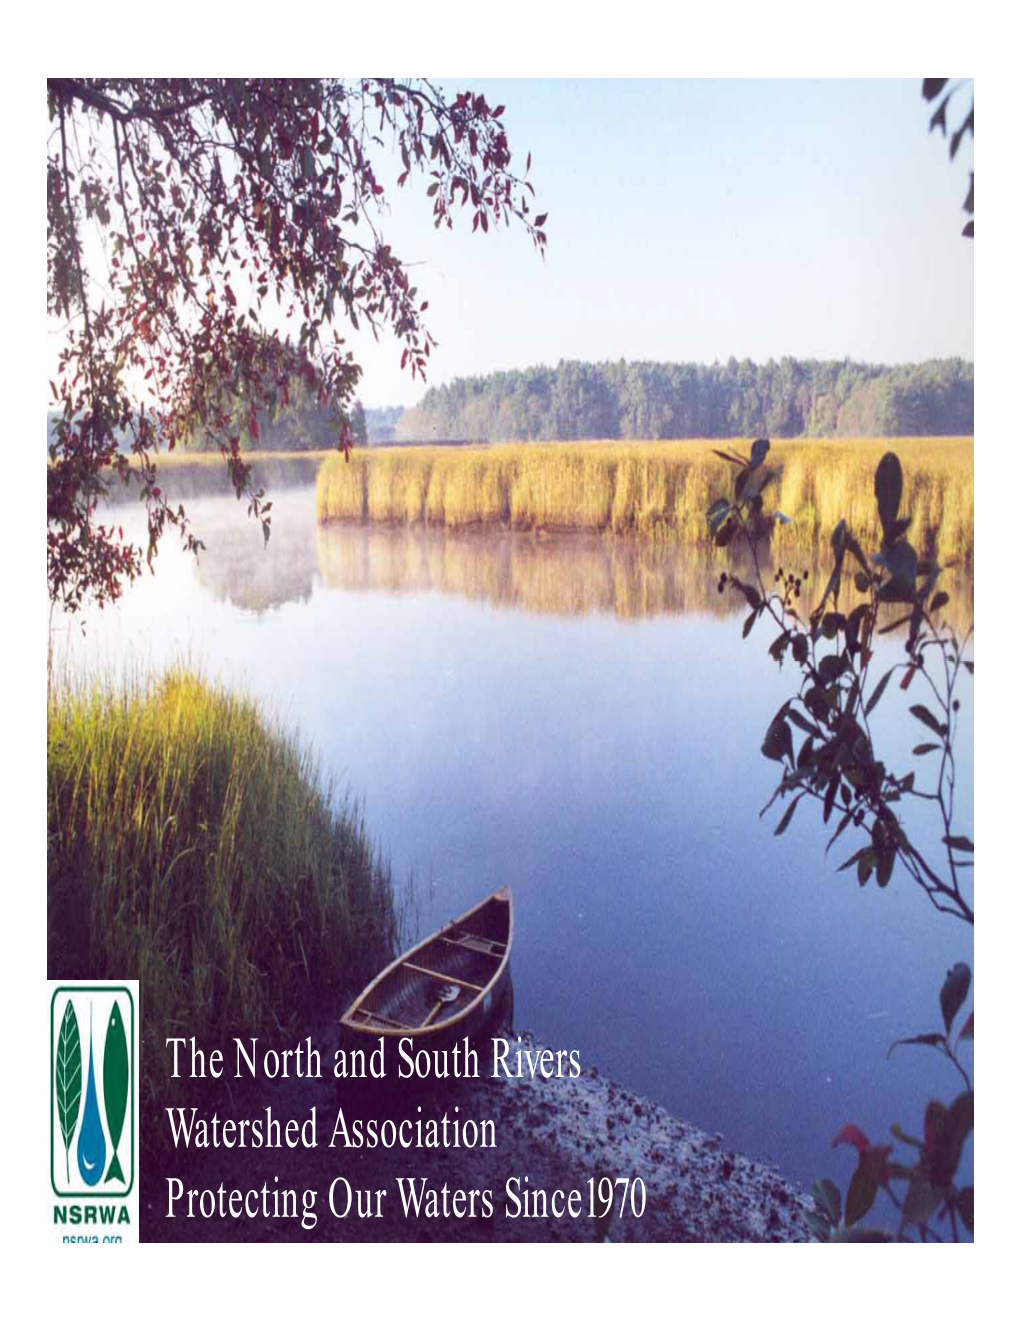 The North and South Rivers Watershed Association Protecting Our Waters Since1970 the North & South Rivers Watershed Association